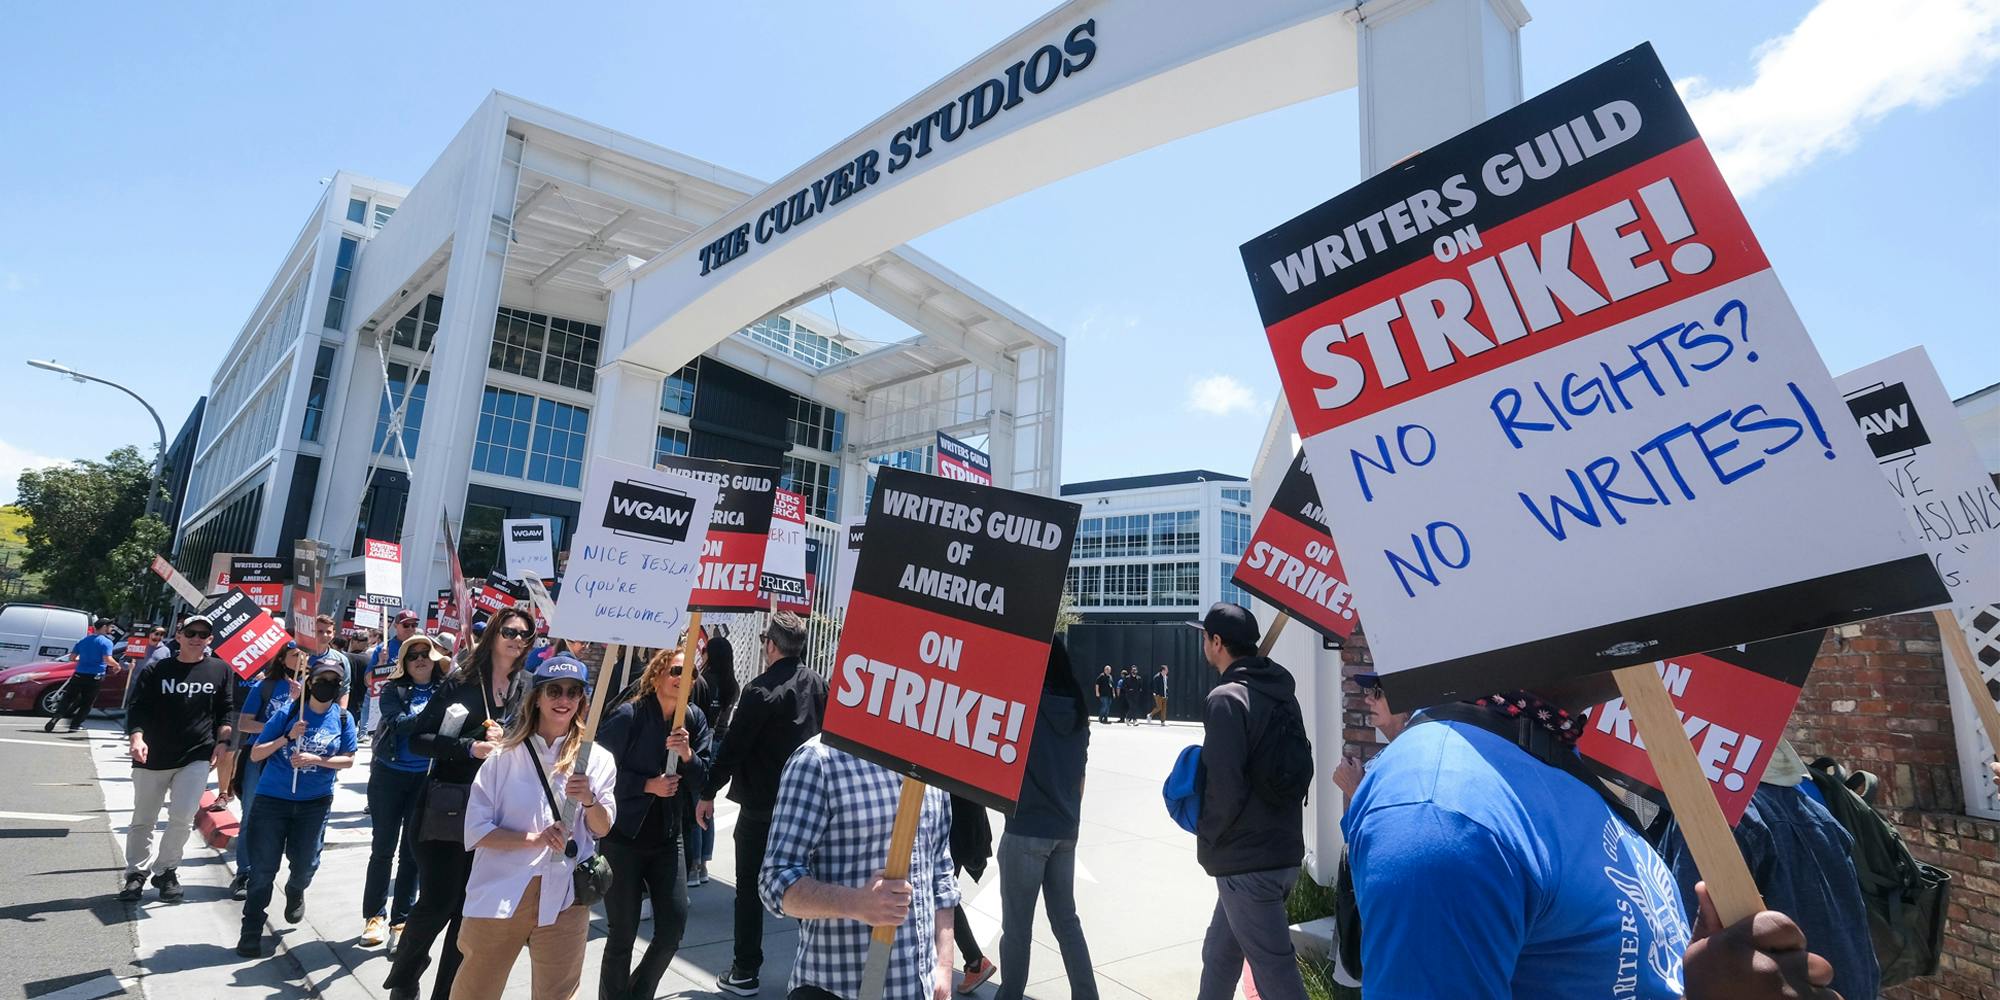 Members of WGA walk with pickets on strike outside the Culver Studio